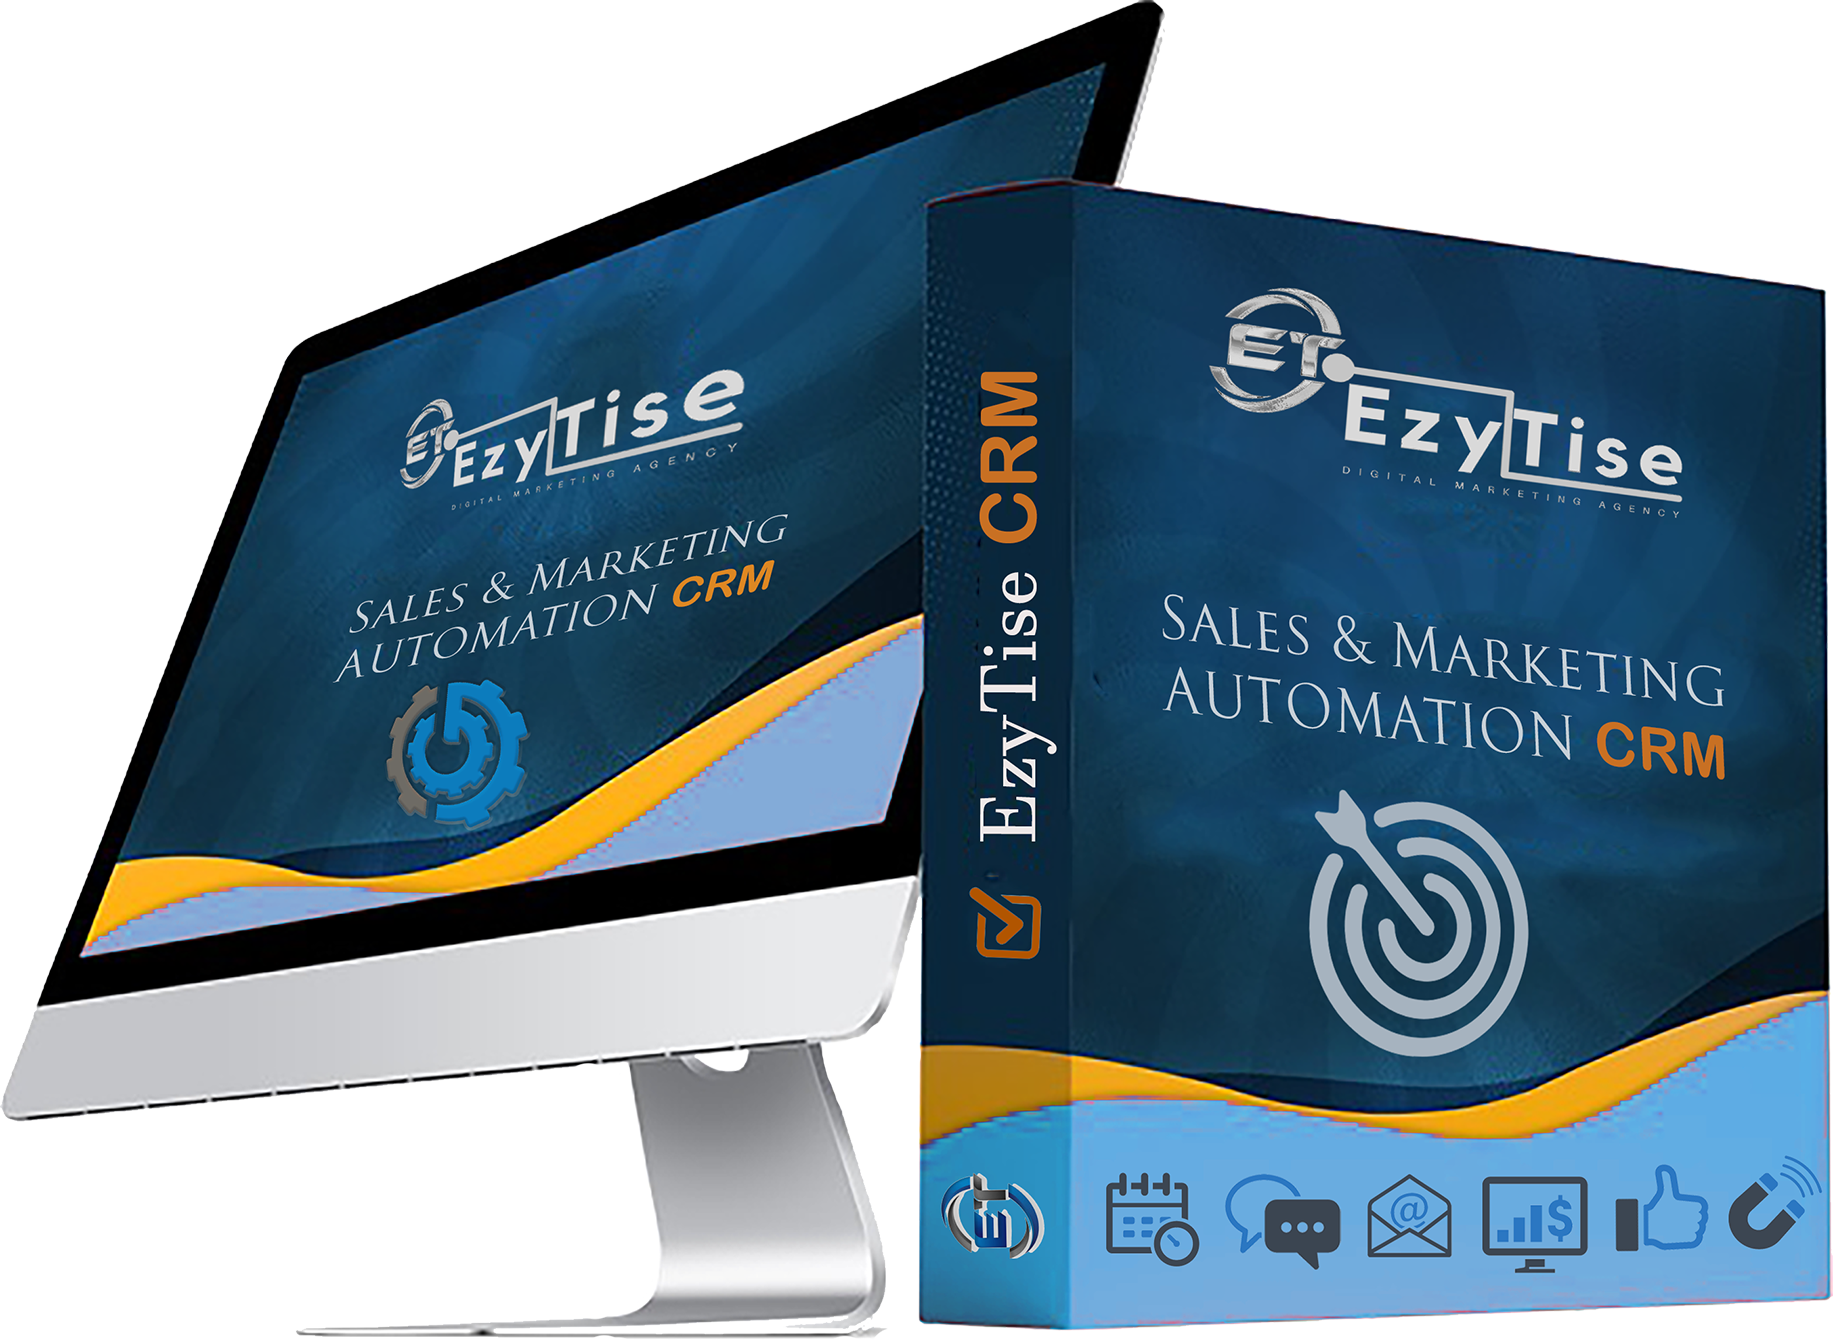 All-In-One Sales & Marketing Automation Software for Email Marketing, Sales Funnels, Websites, Webchat, Reputations Management, Forms, Survey, and more... F